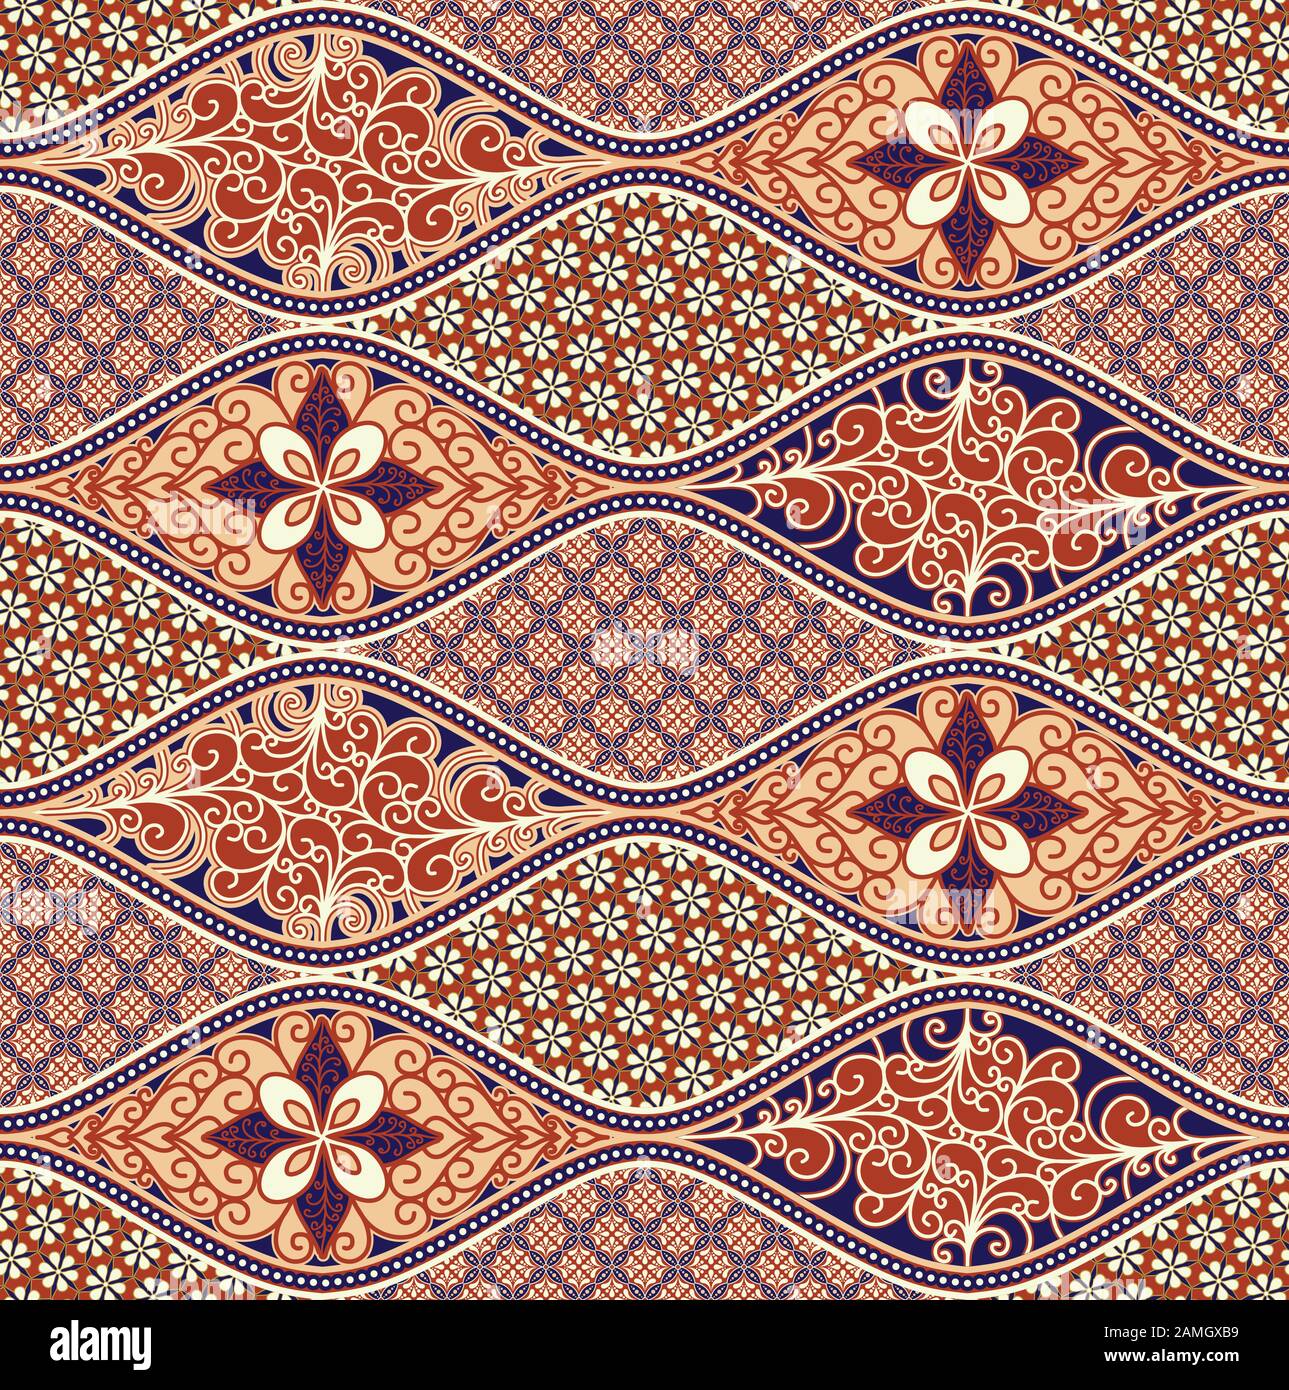 batik motif seamless pattern vector. fully editable. Easy color change and transform to suit any purpose Stock Vector